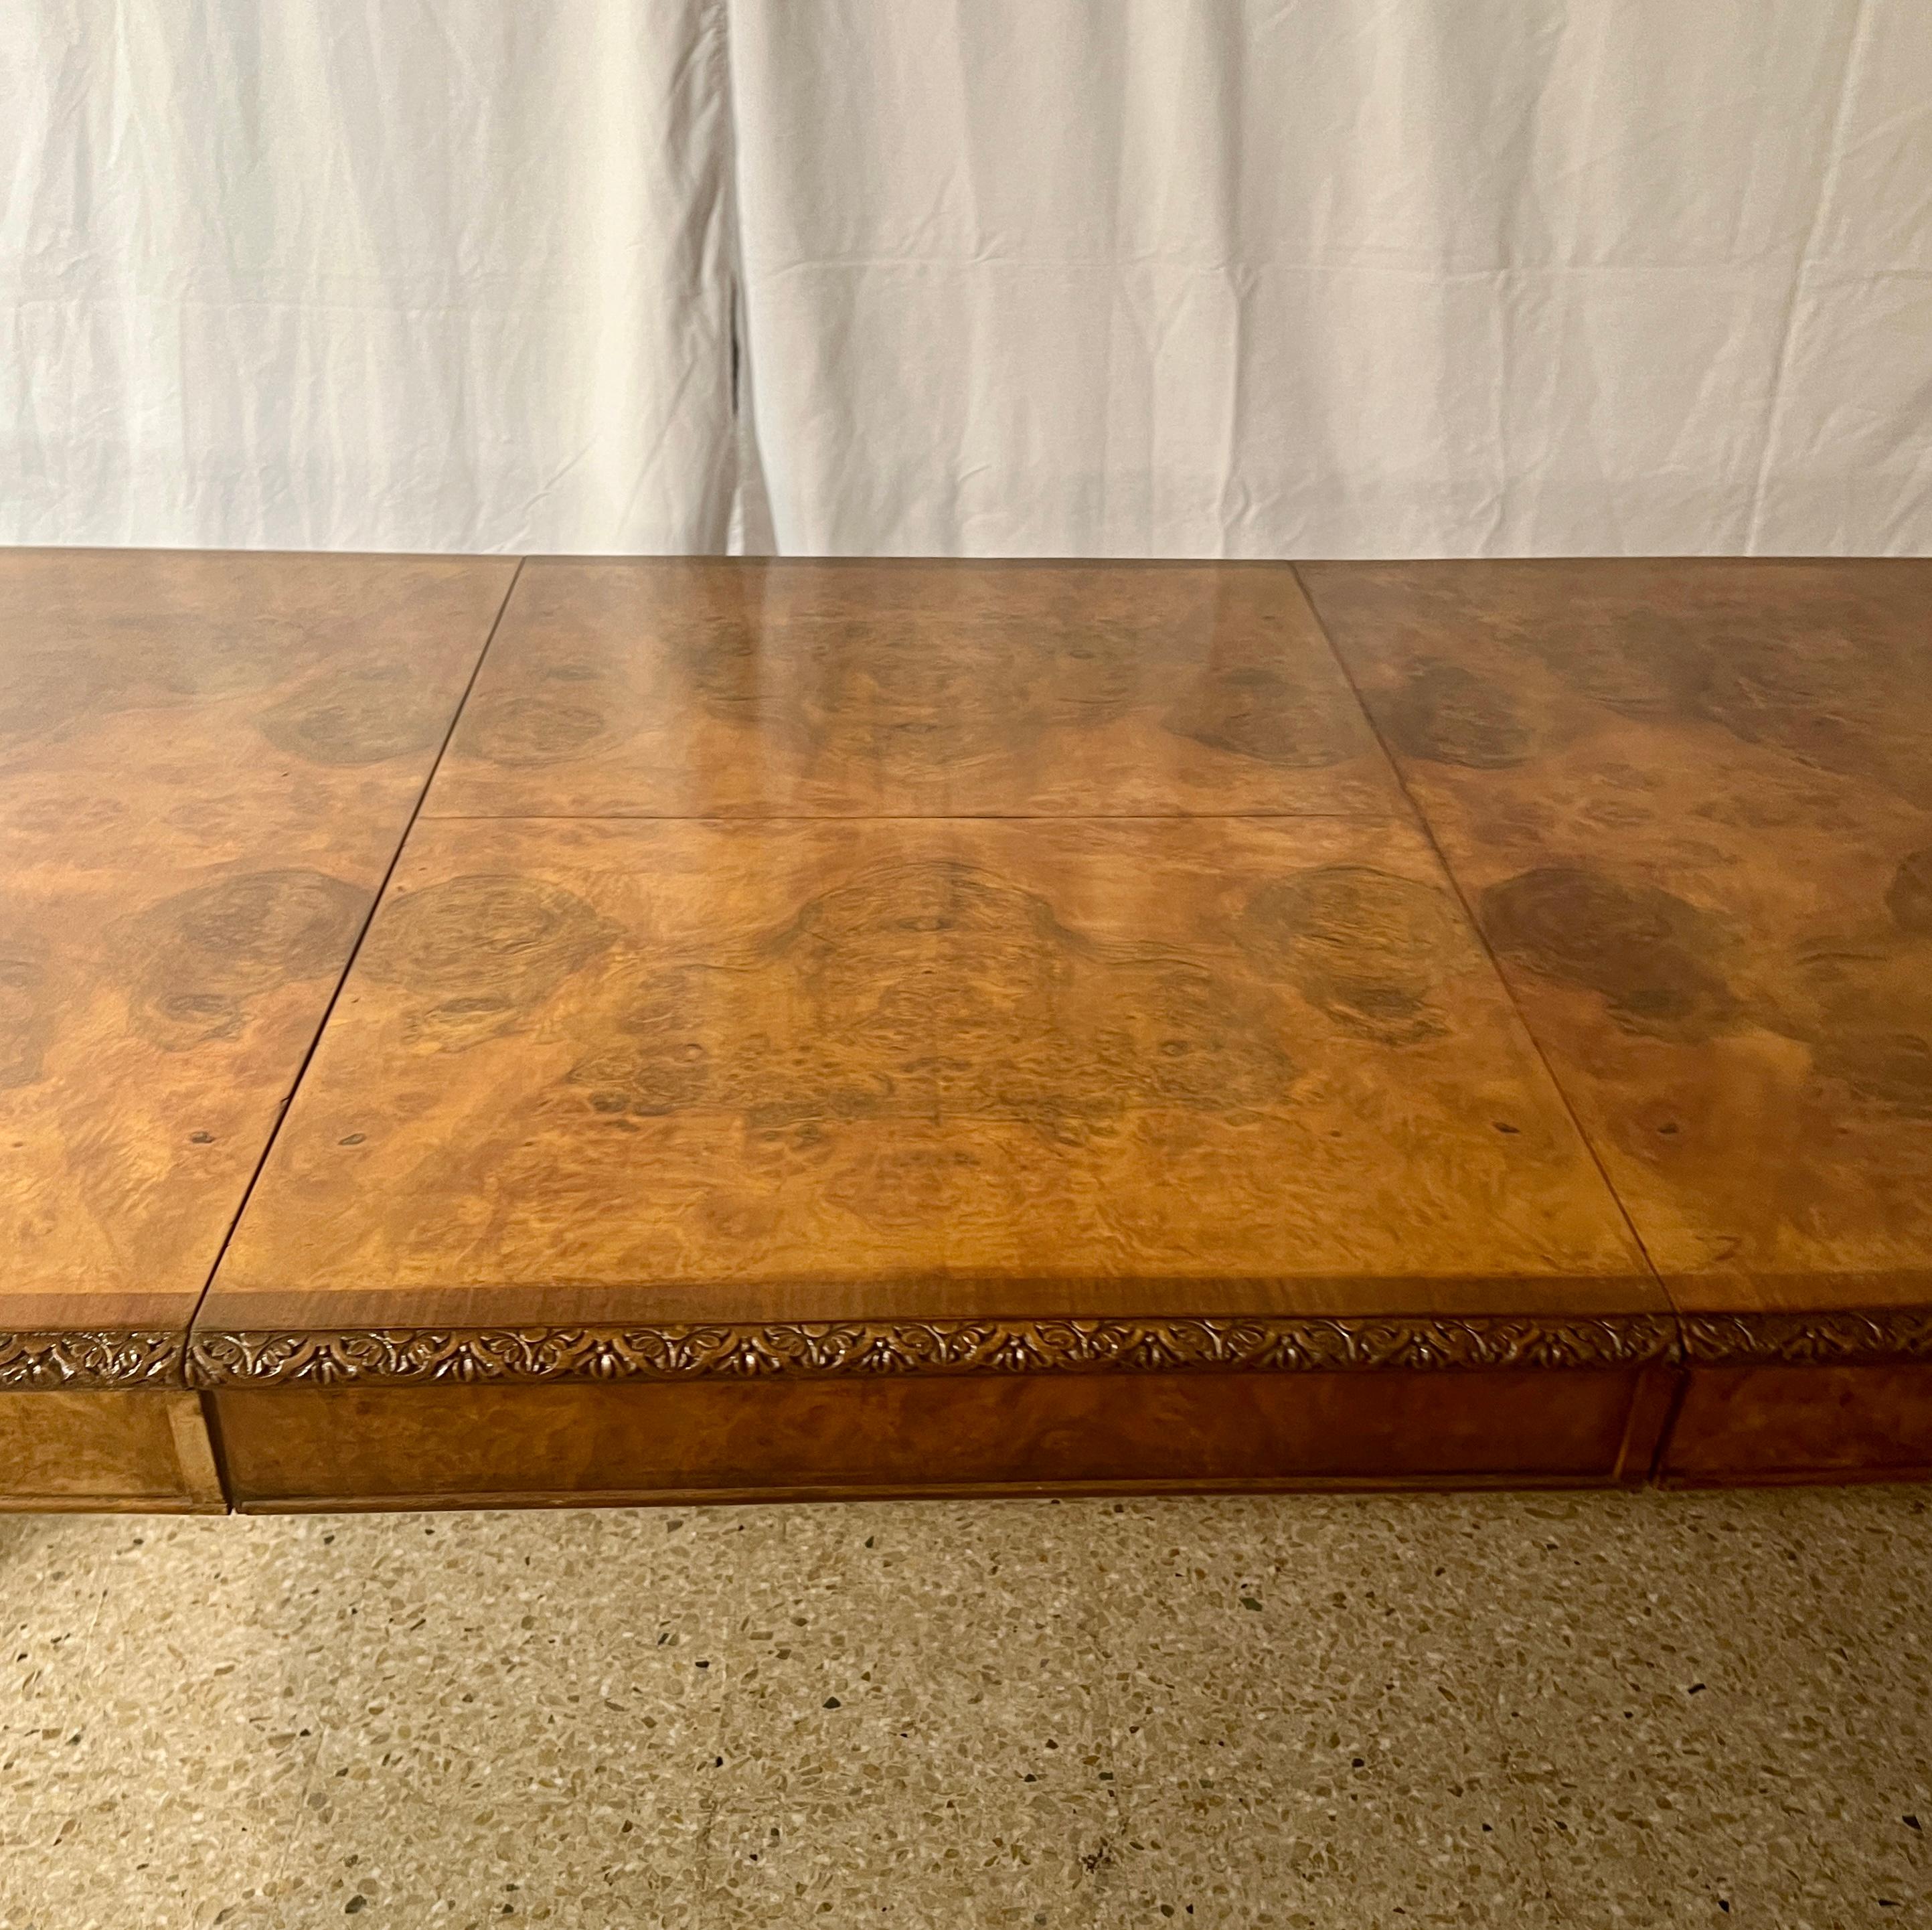 20th Century Antique English Carved Burled Walnut Dining Table with Interior Leaf, Circa 1900 For Sale